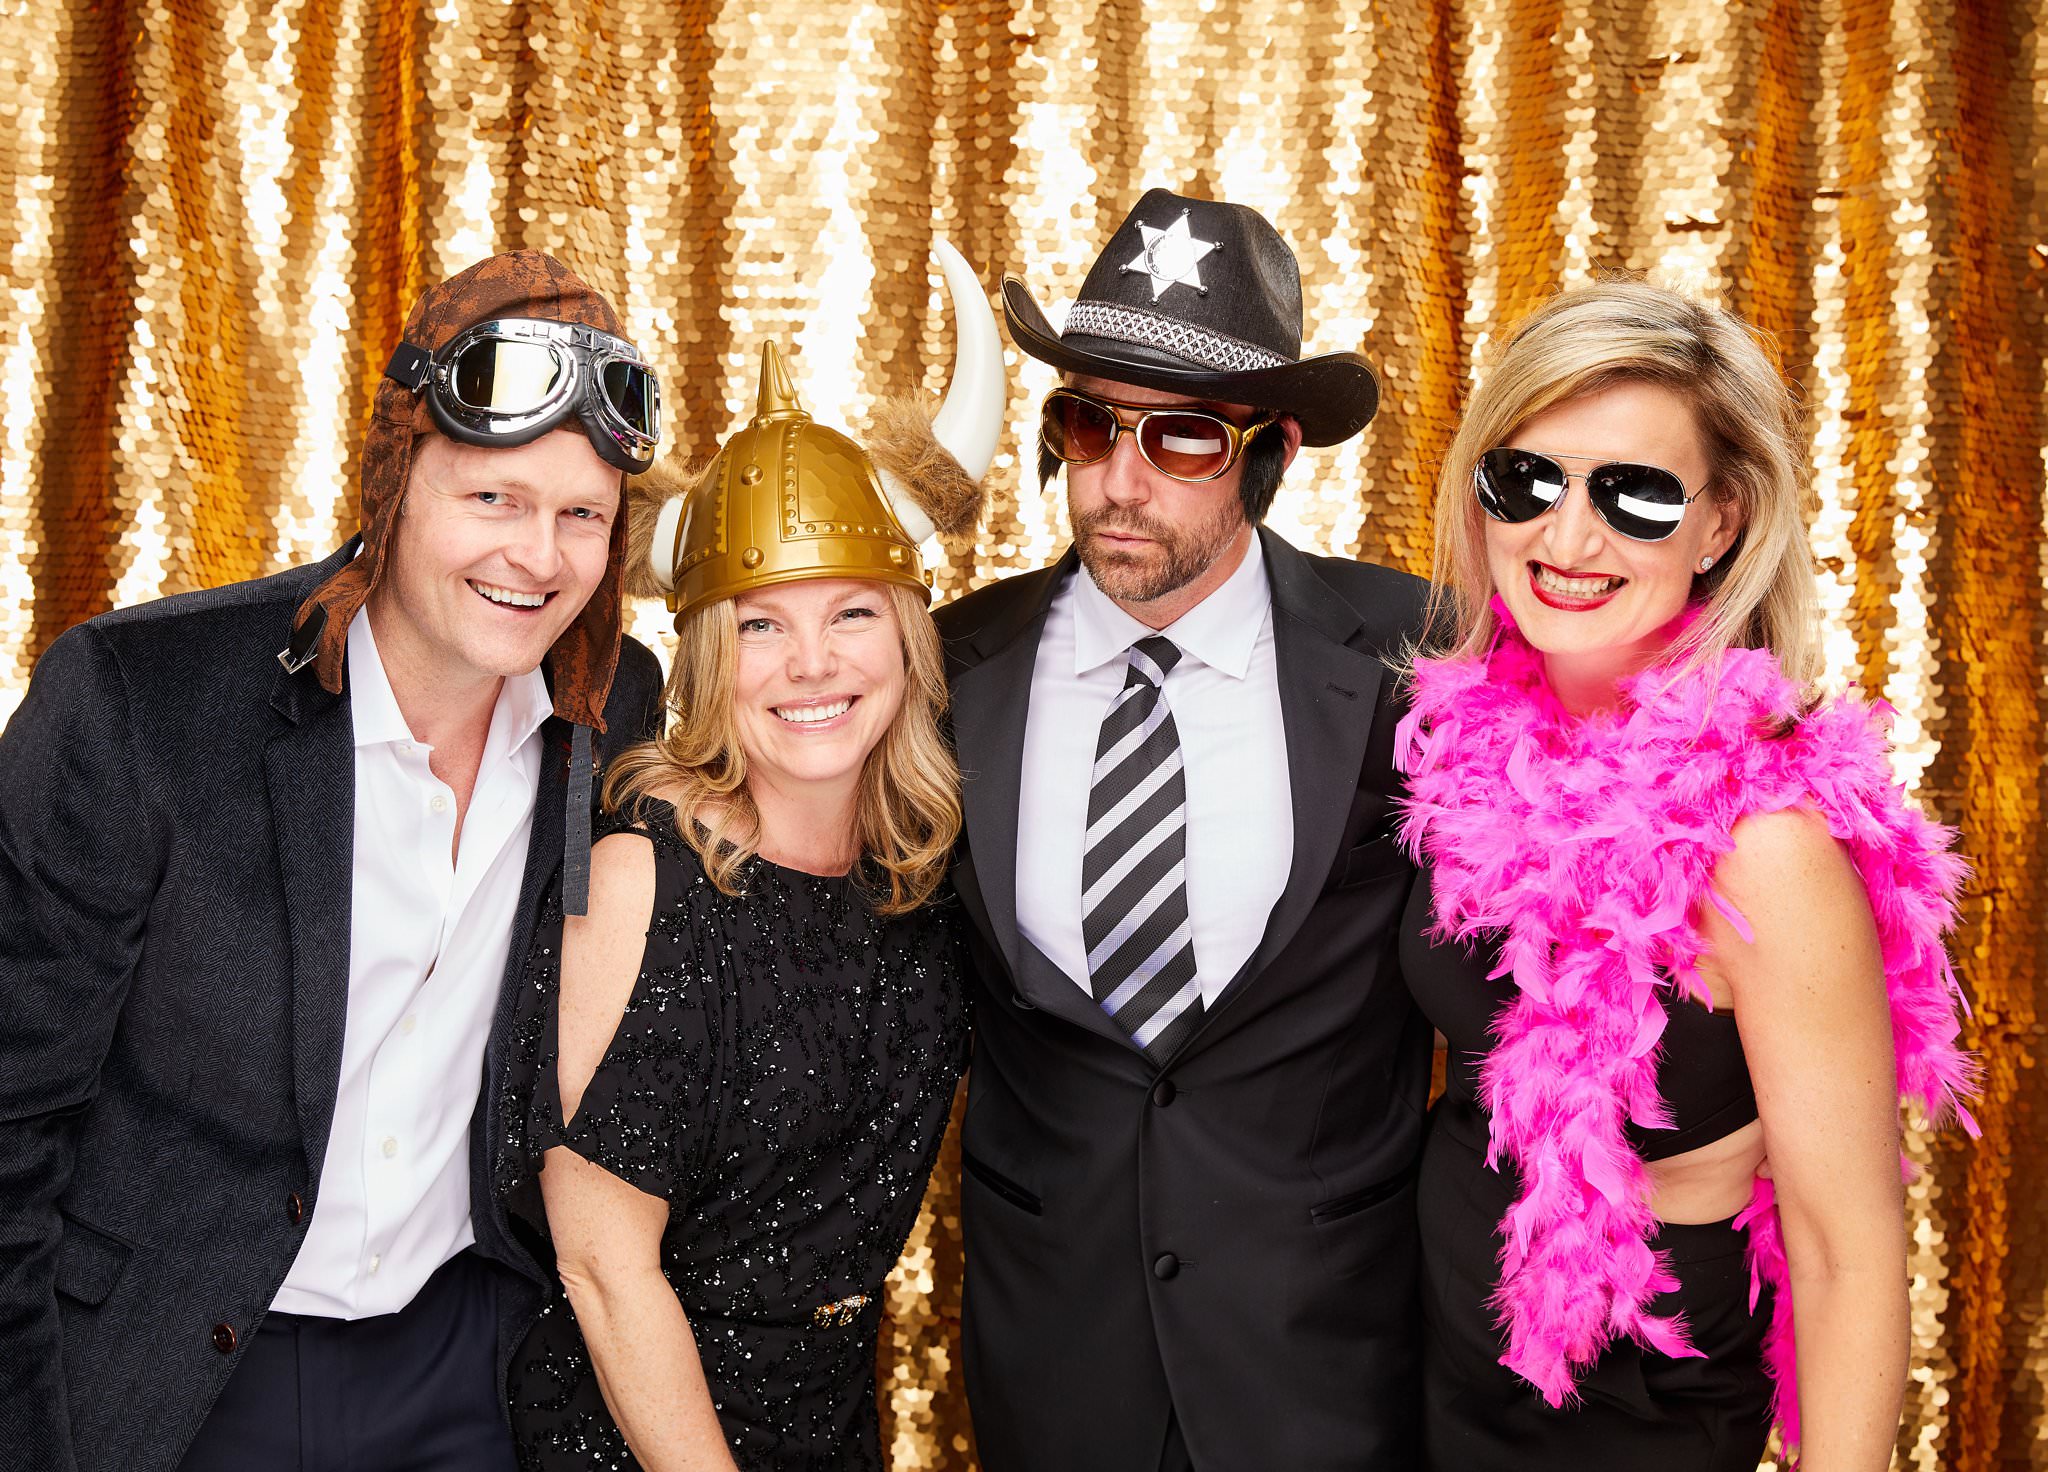 Event Portraits Photo Booth by Photographers | One Tree Studio 